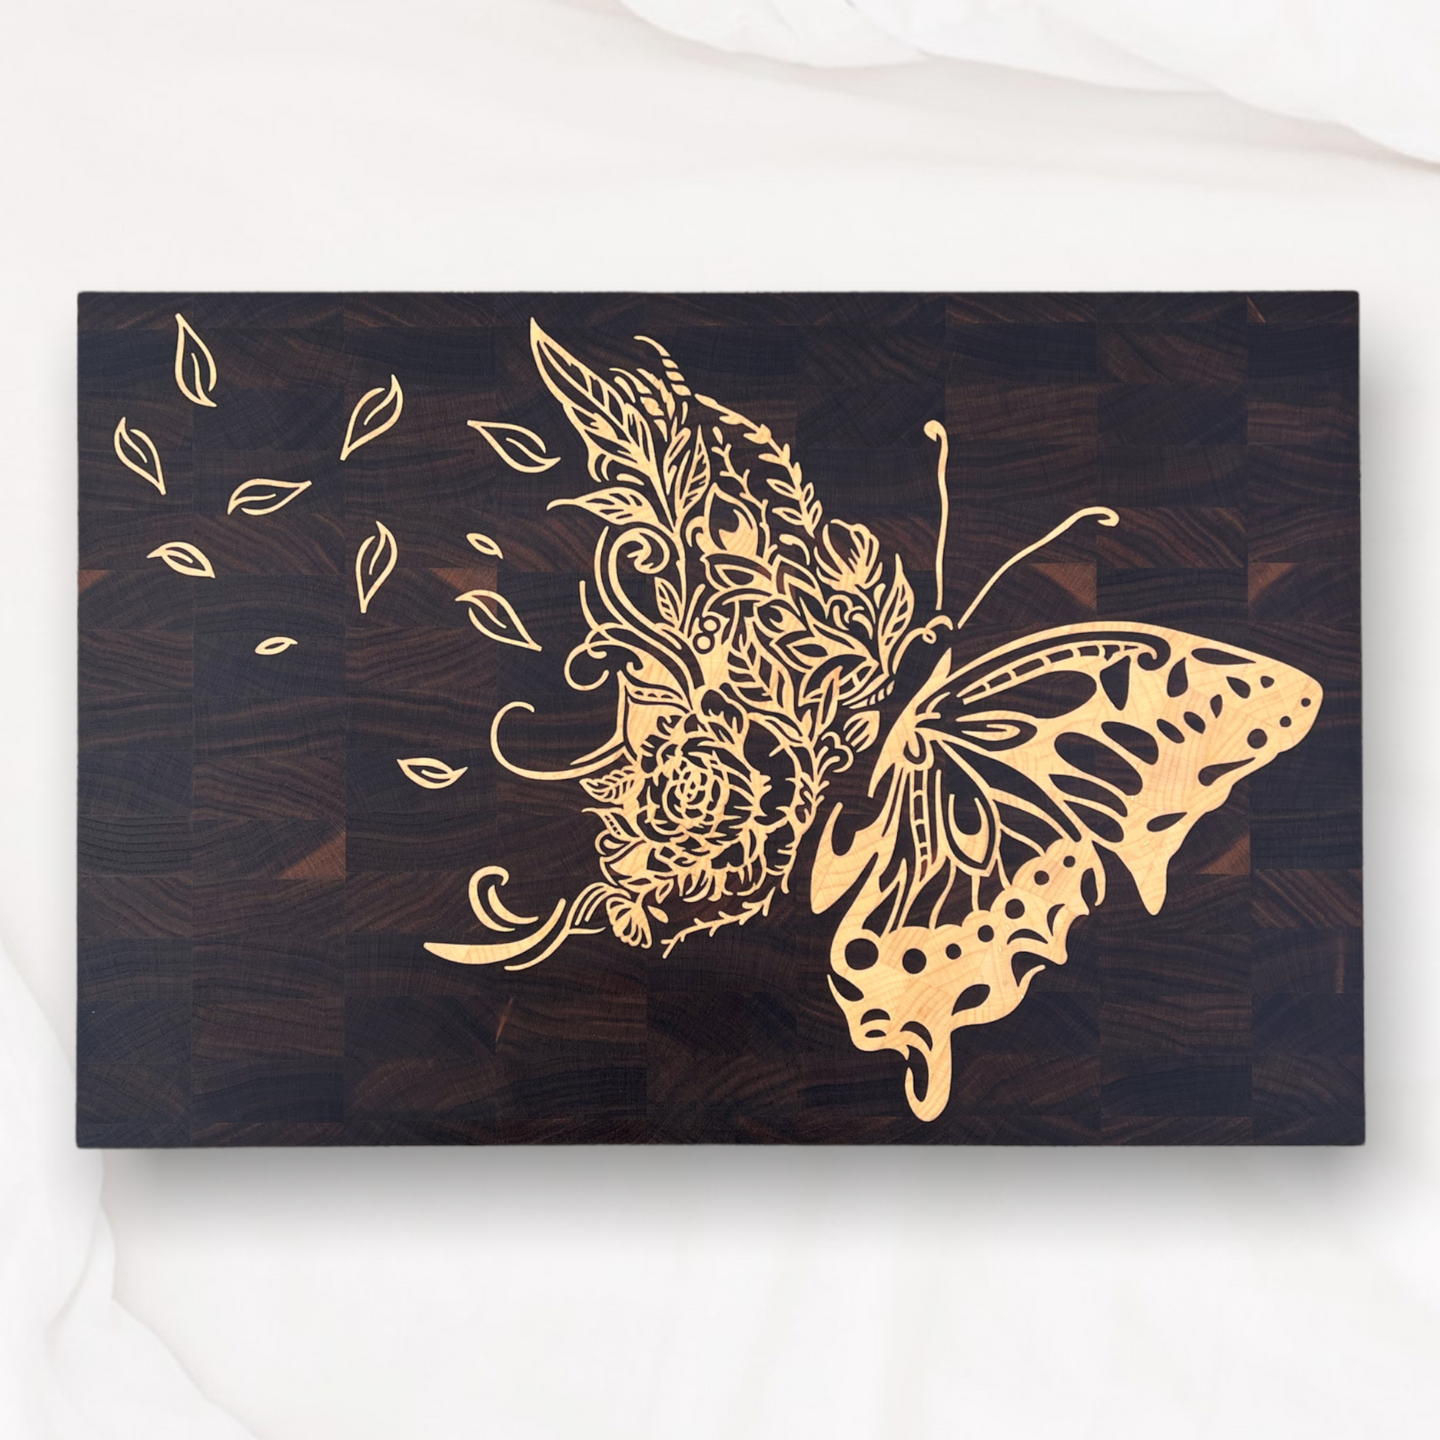 The Butterfly CNC inlay plan